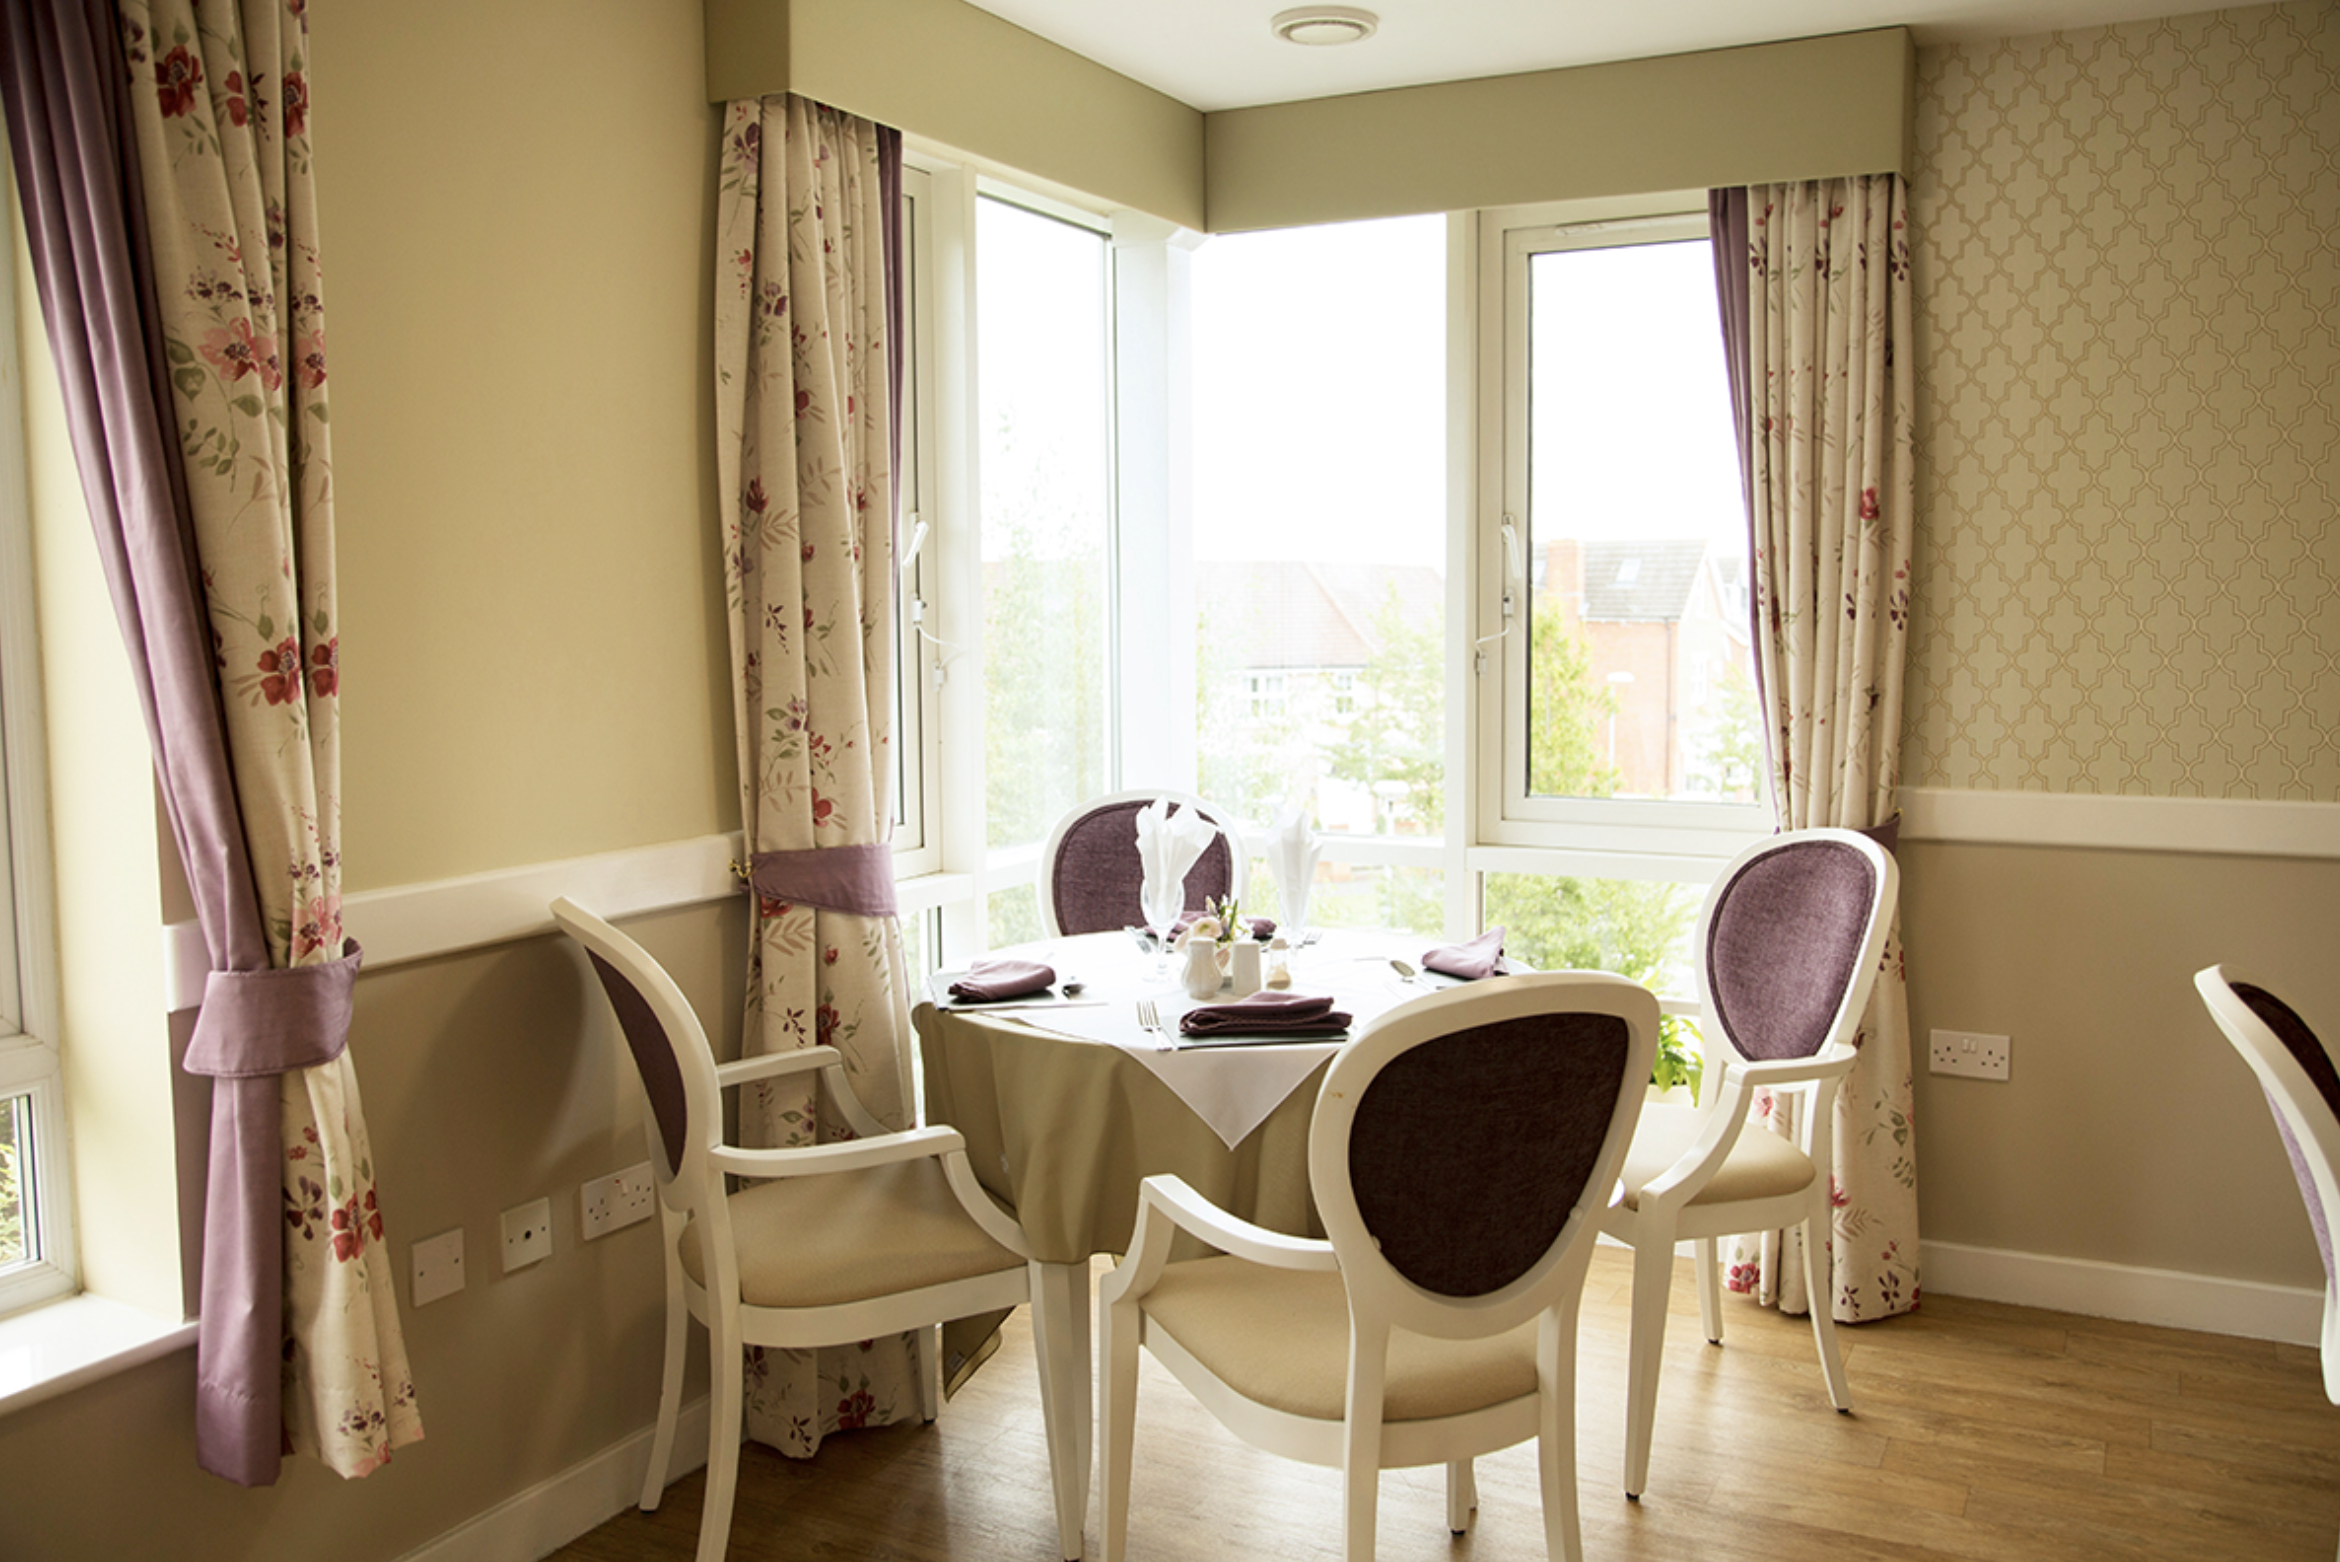 Dining area of Hampden Hall care home in Aylesbury, Buckinghamshire